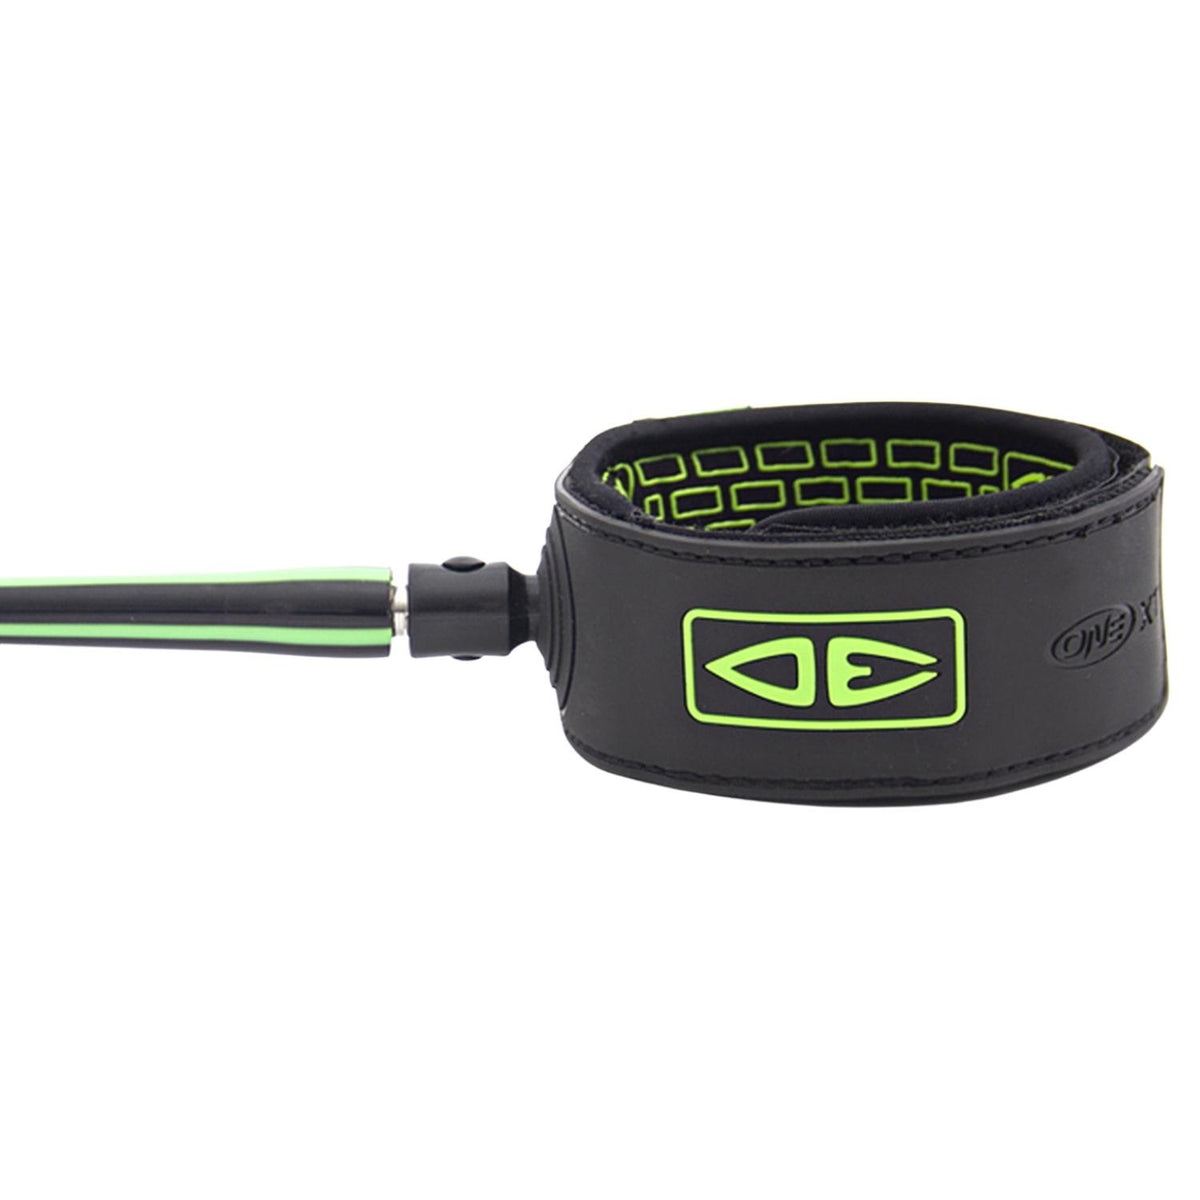 Ocean And Earth 6ft Premium Xt Leash - Lime - 6ft Surfboard Leash by Ocean and Earth 6ft